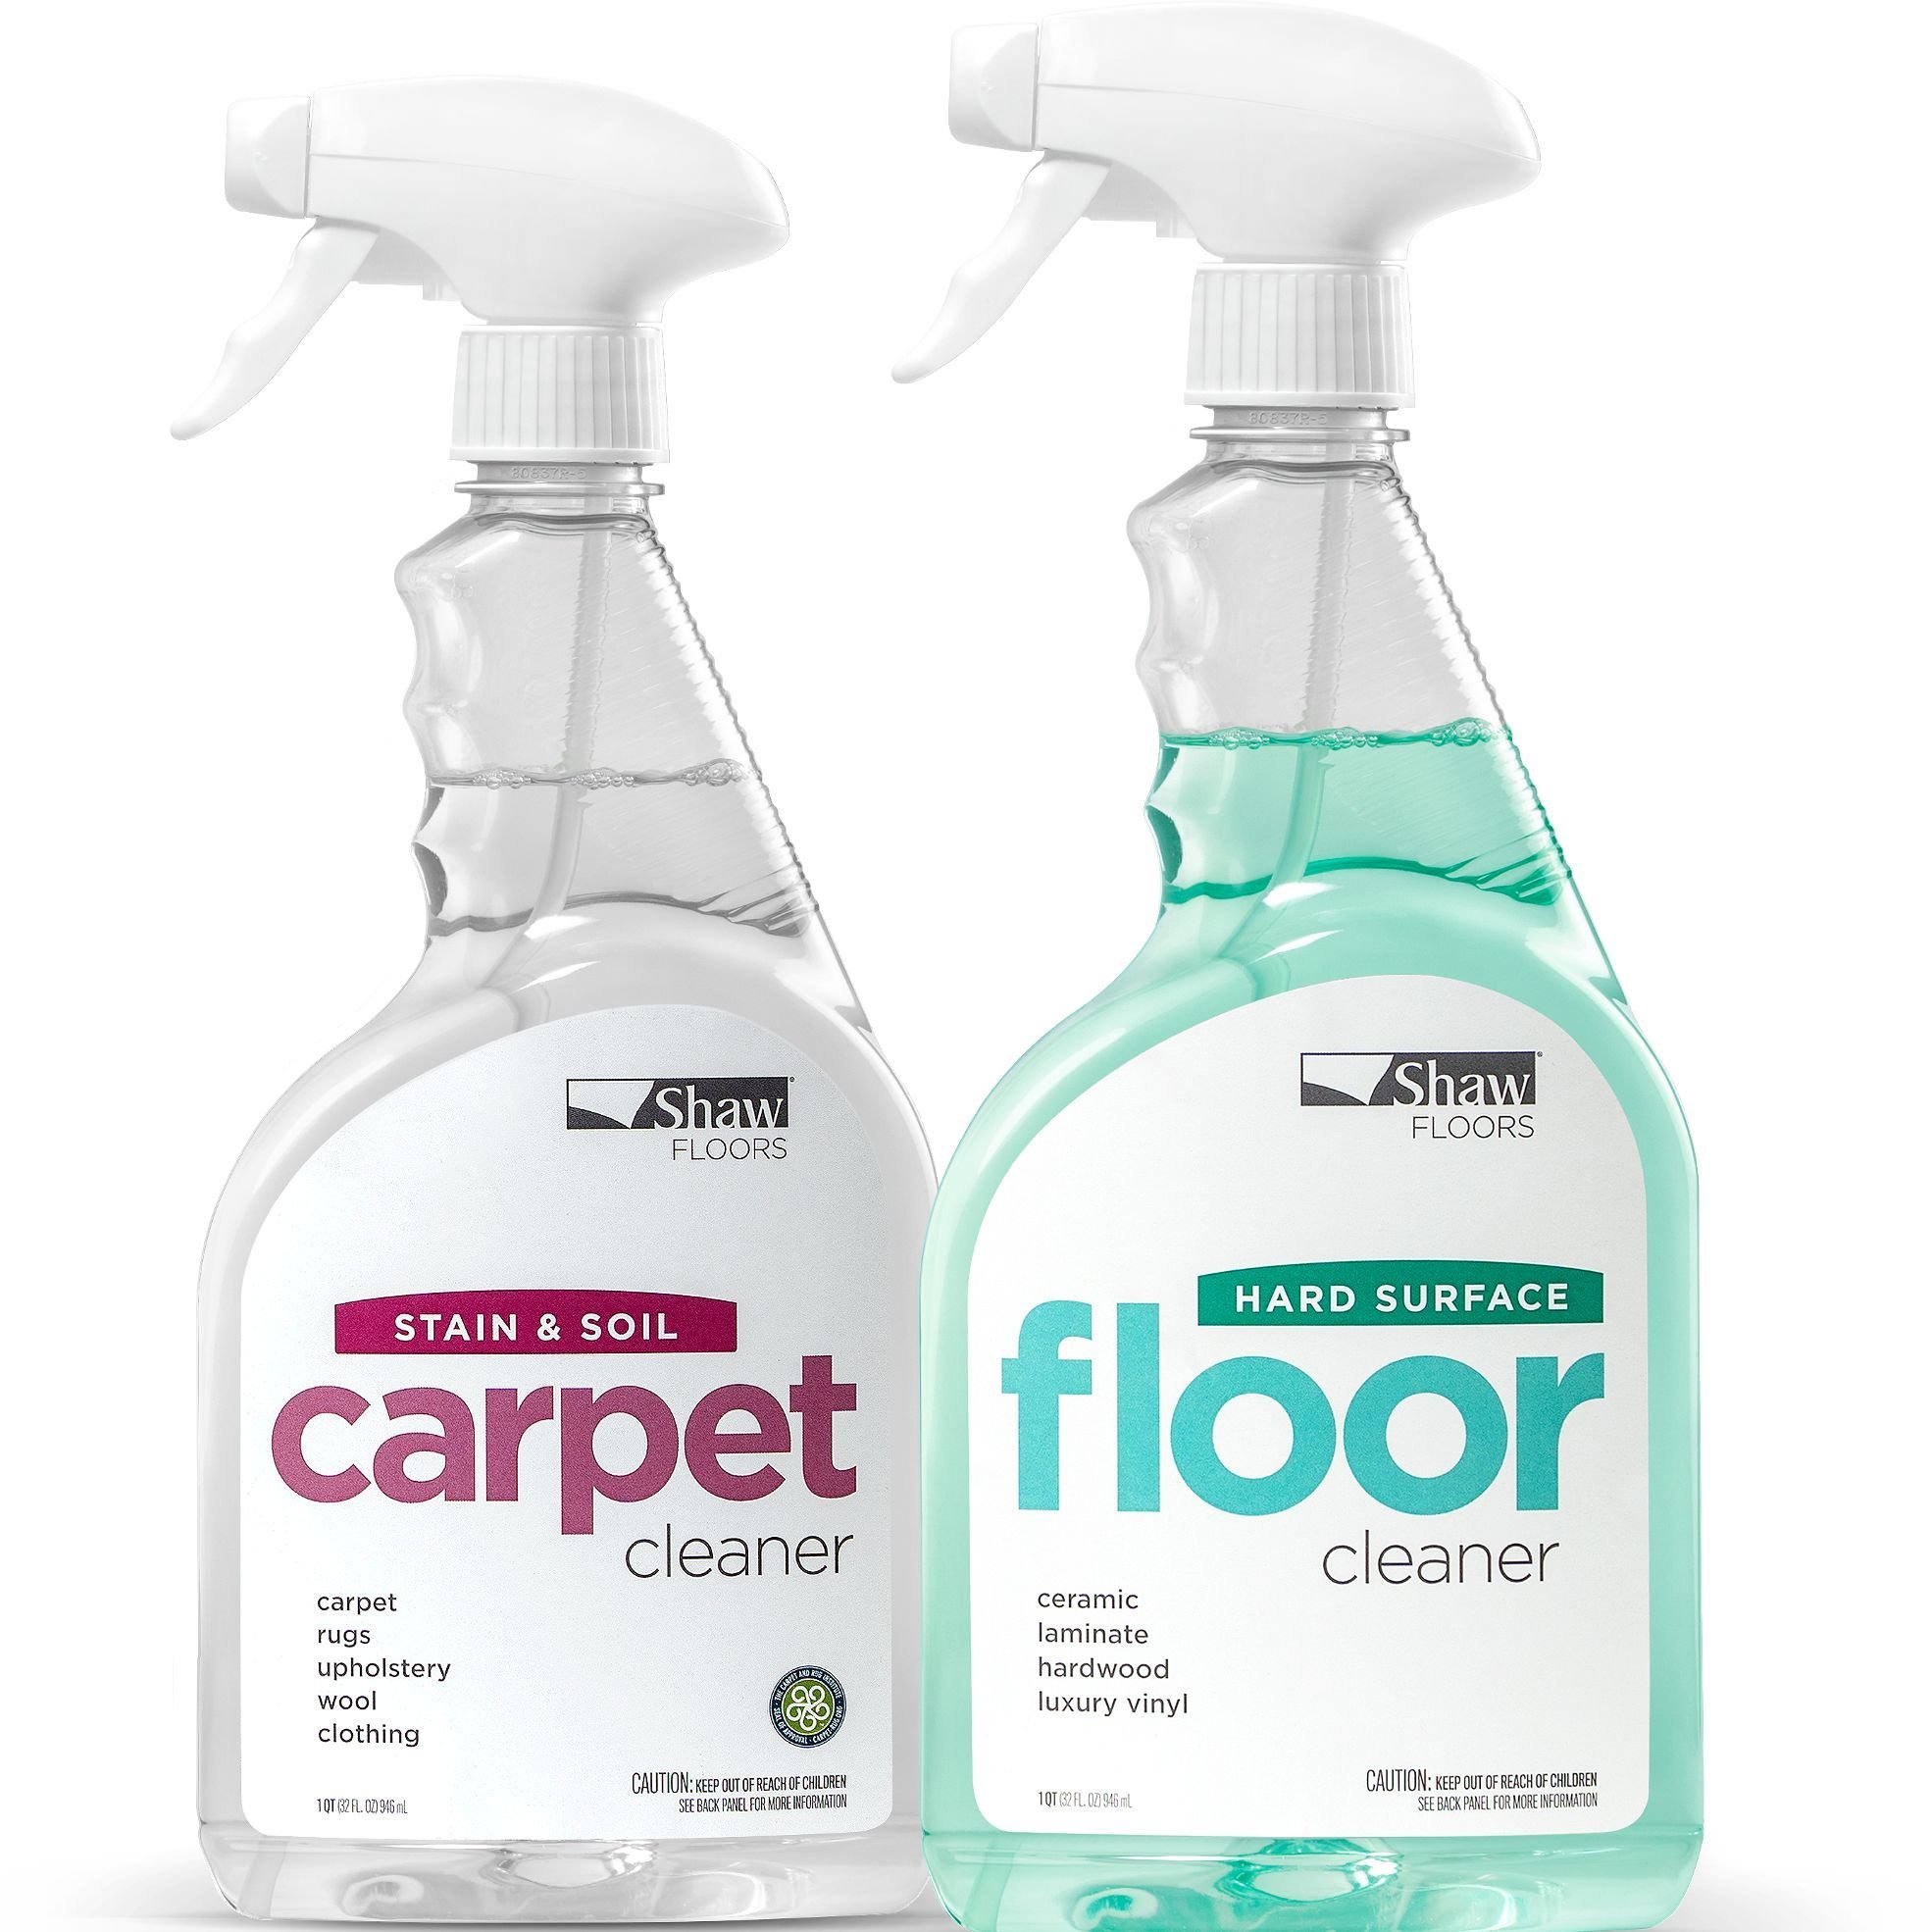 carpet and floor care and maintenance bottles - luckysevenscarpet